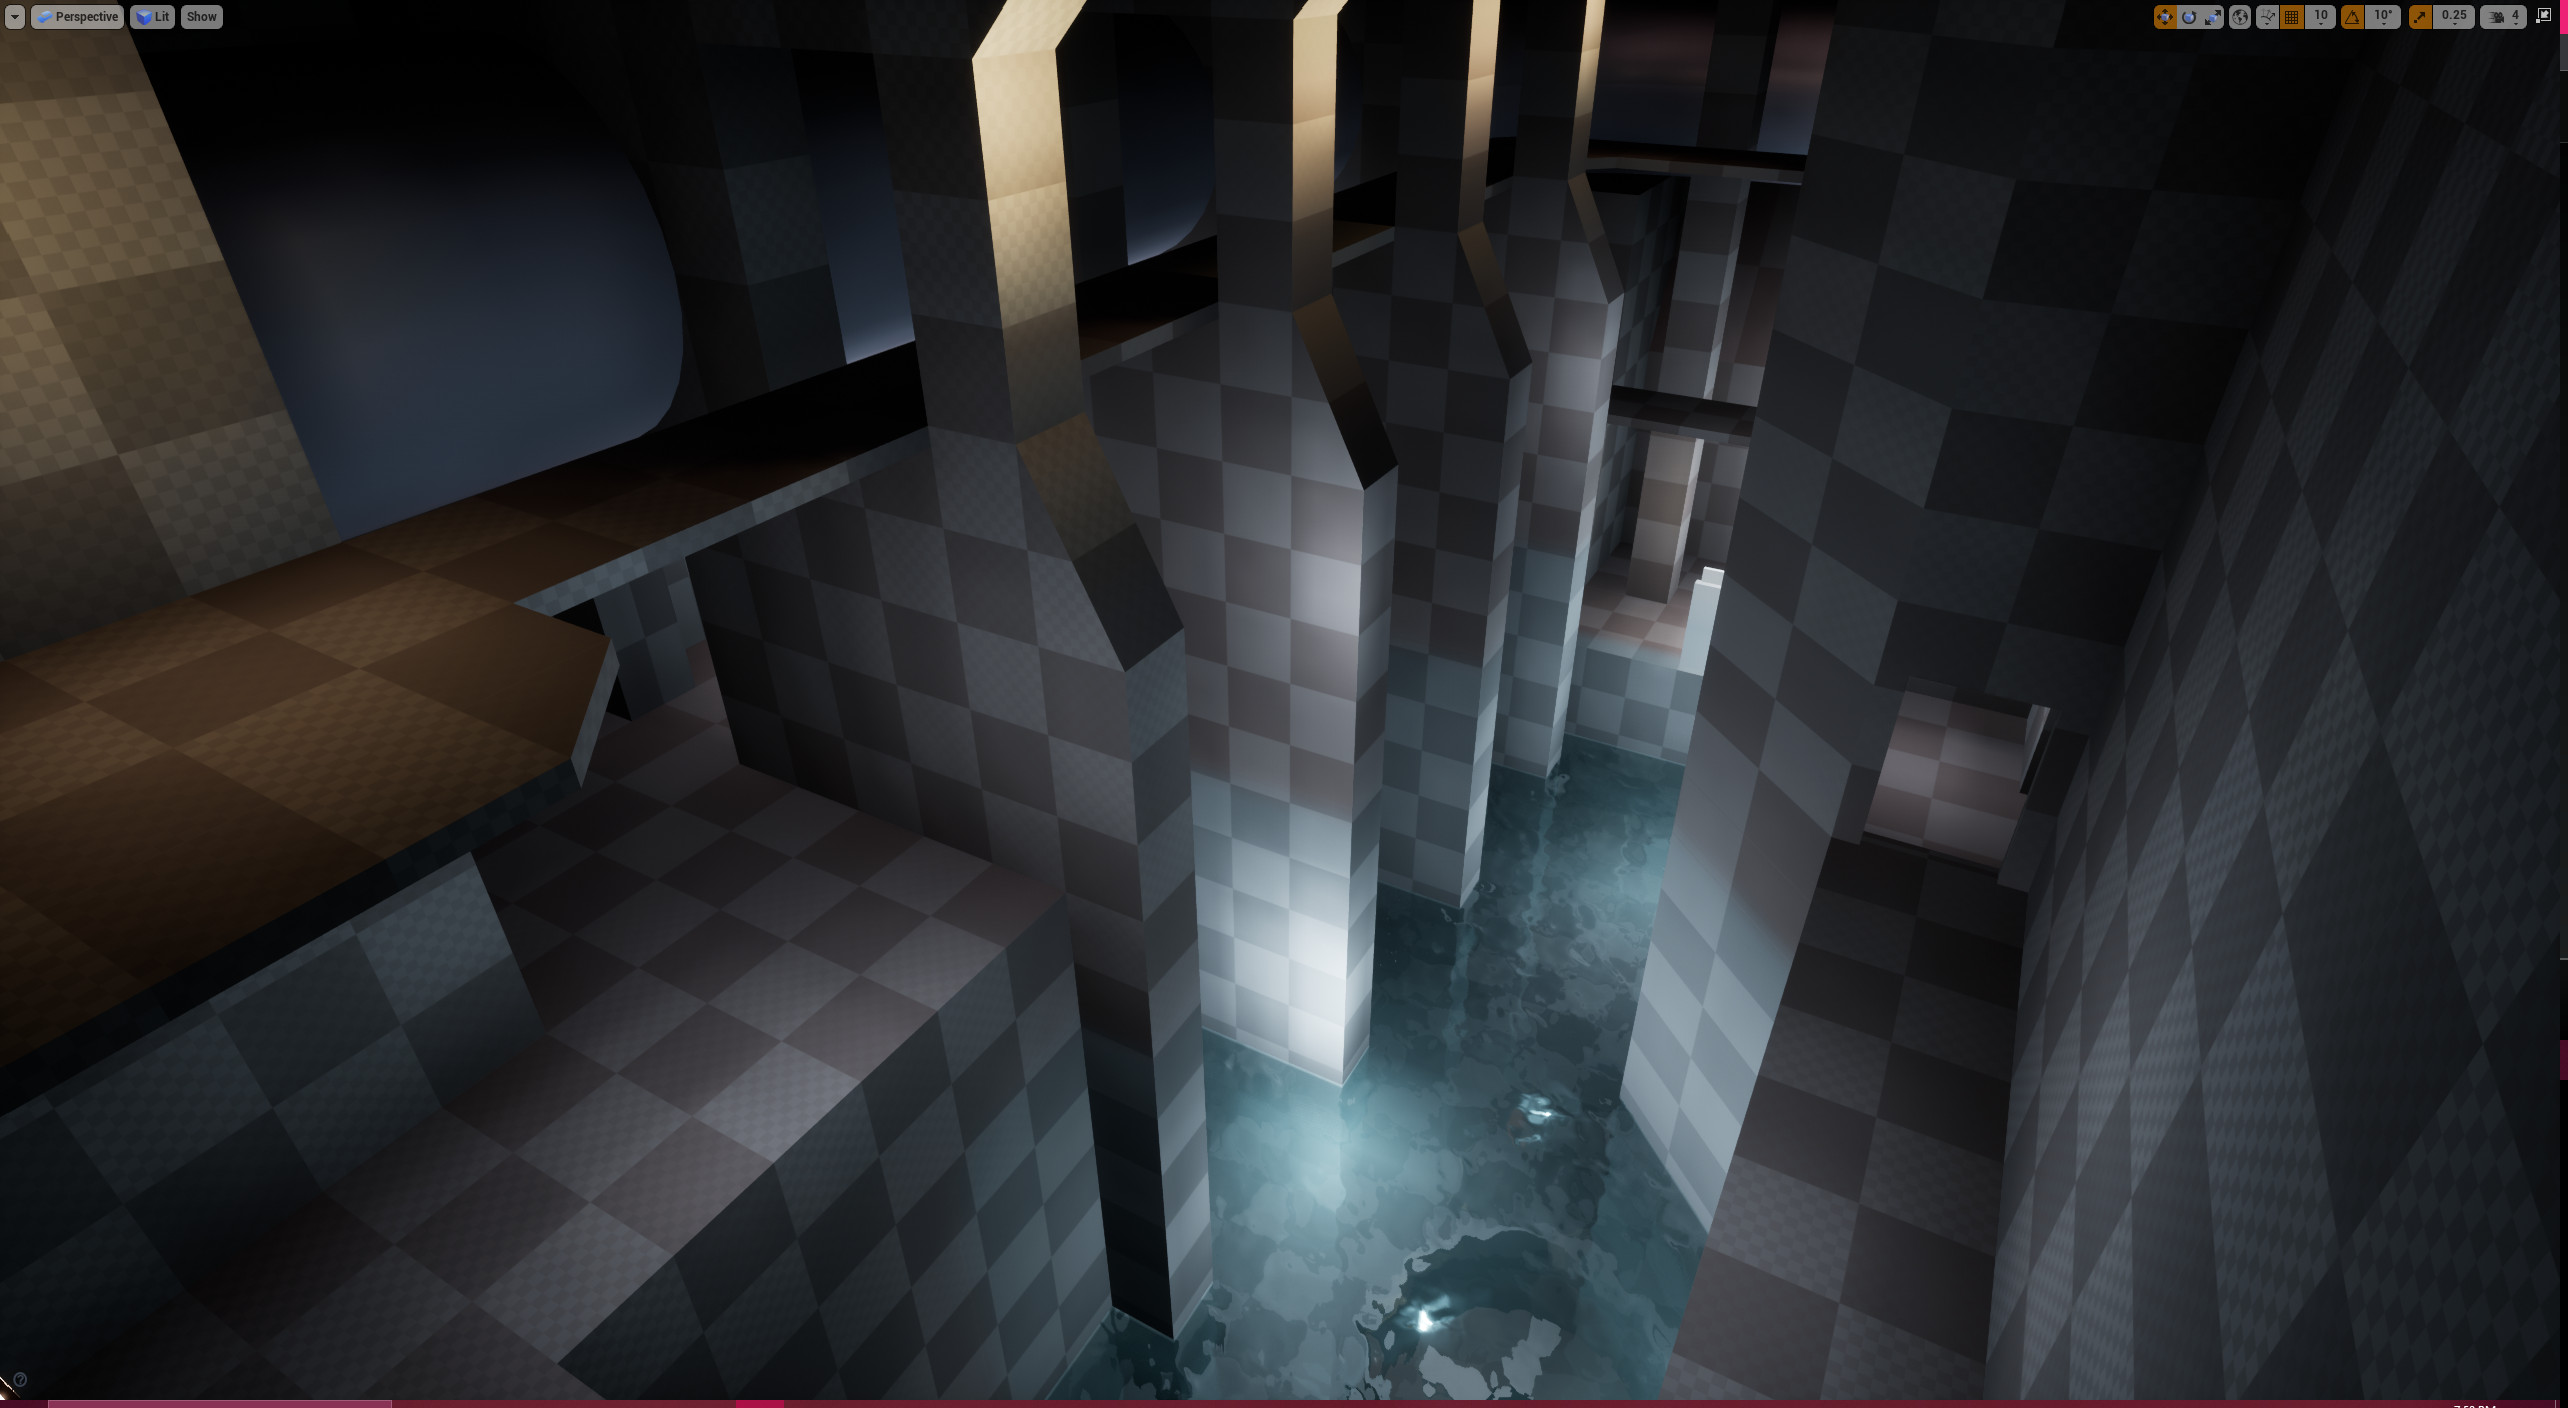 The waterworks section that requires the player to fill the lower area with water to proceed.